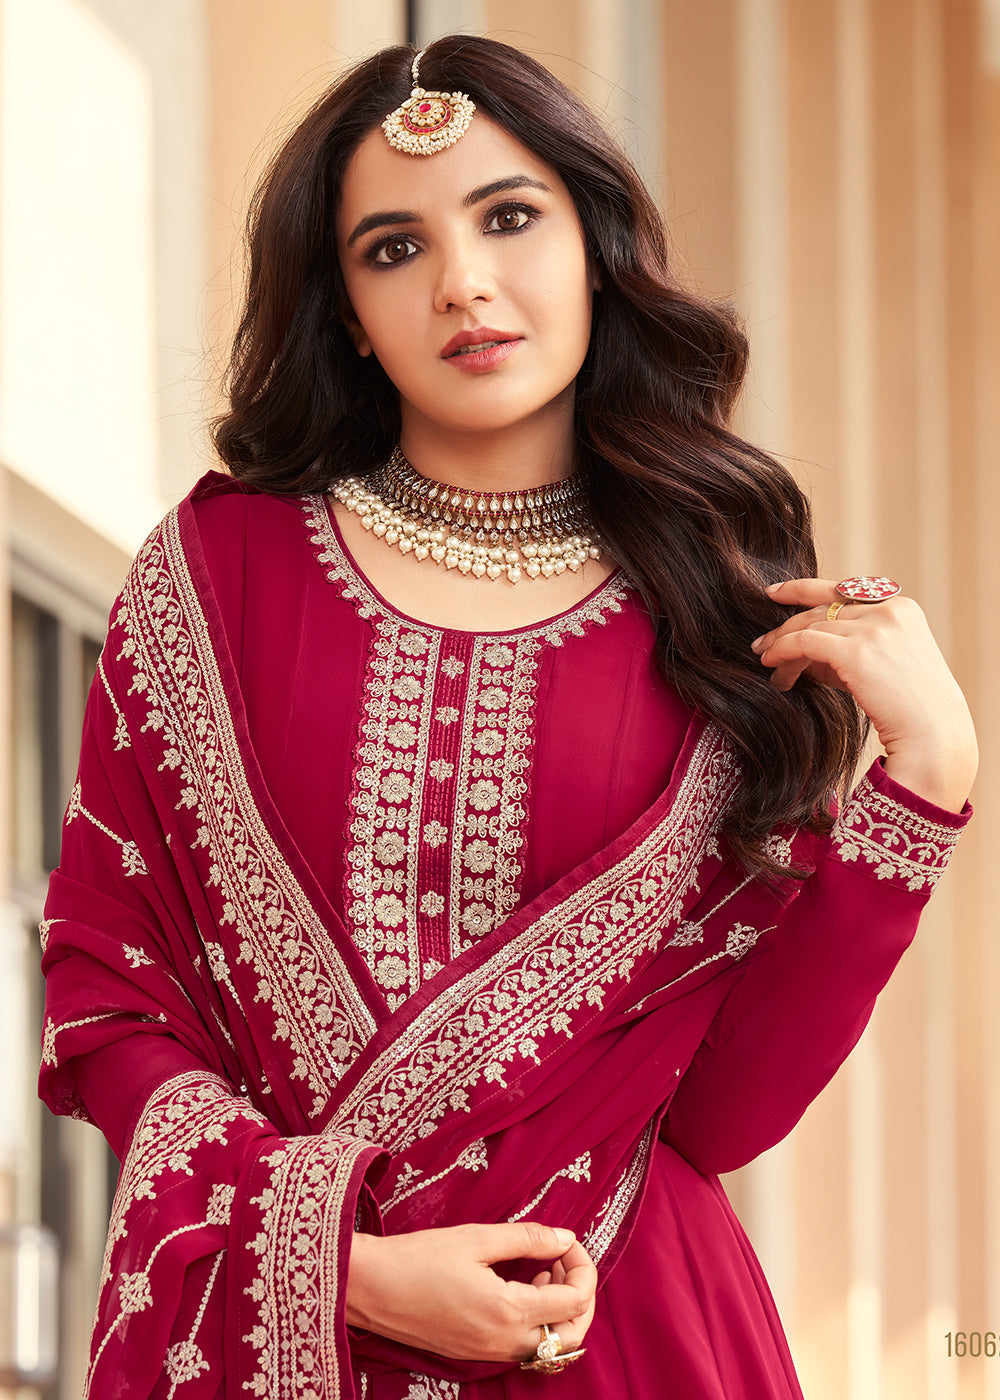 Buy Now Georgette Magenta Pink Embroidered Indian Long Anarkali Dress Online in USA, UK, Australia, New Zealand, Canada & Worldwide at Empress Clothing. 